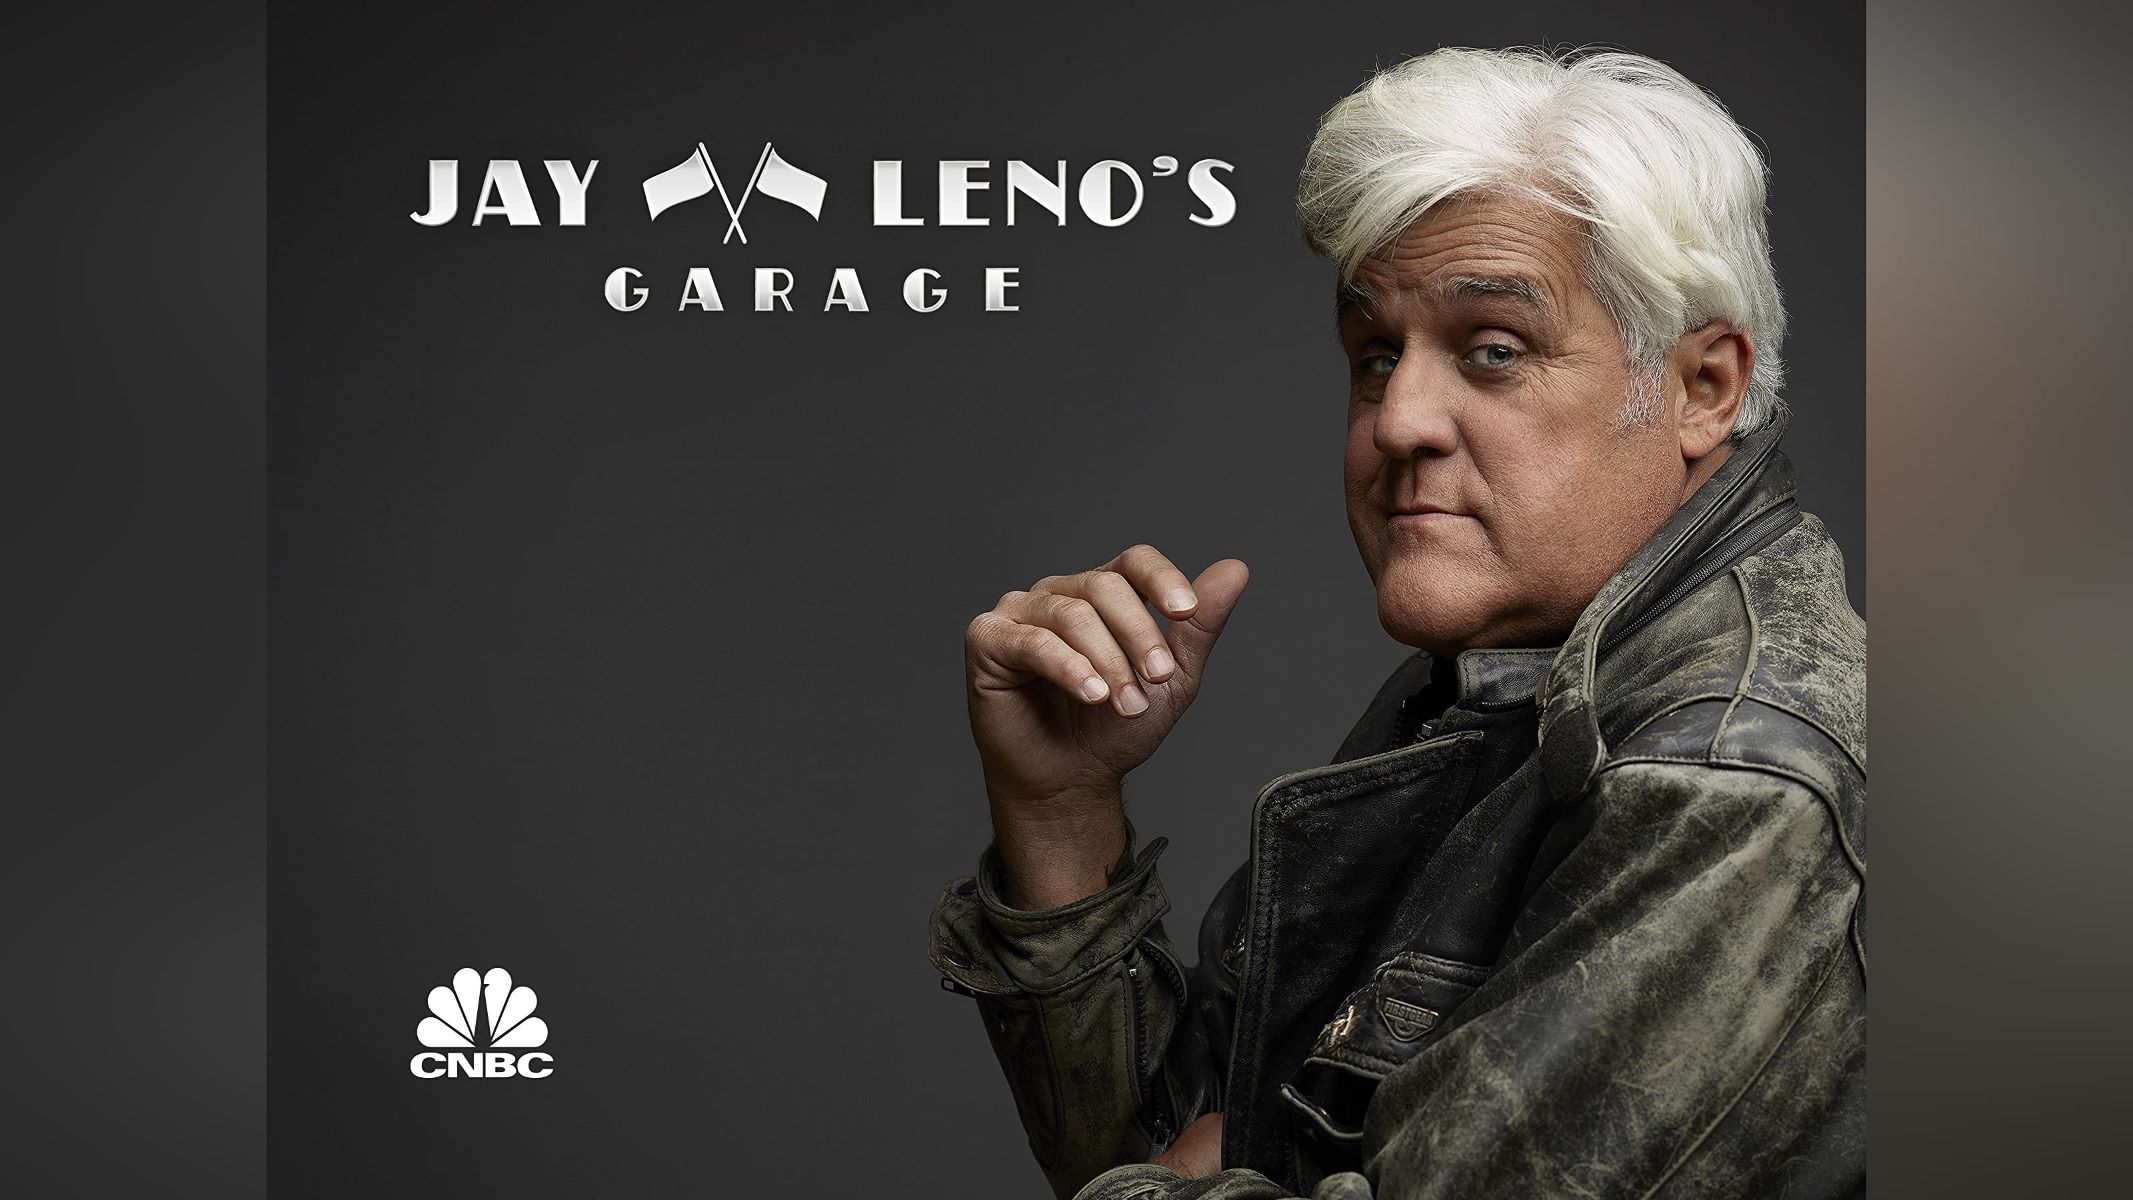 How To Watch Jay Leno’s Garage